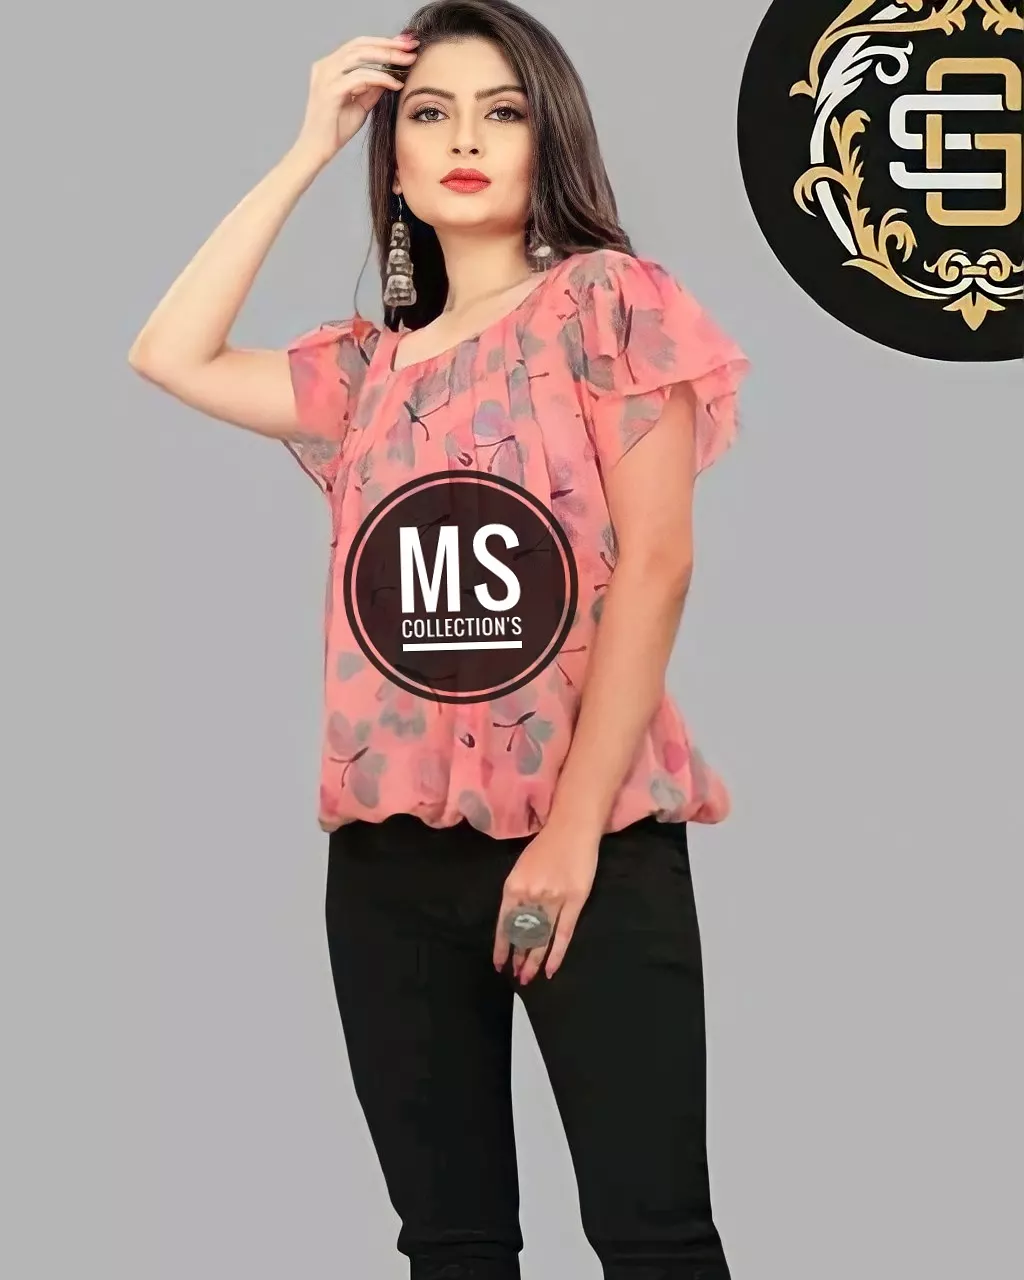 Post image *MS Collection's Present's*
*MS Code:-157*
*Latest Women Design Top*
*Fabric:- Georgette*
*Size Range Available*
*S To XL*
*At Affordable Price:-₹420*
*Free Shipping + Cash On Delivery Available*
*Regards MS Collection's*©